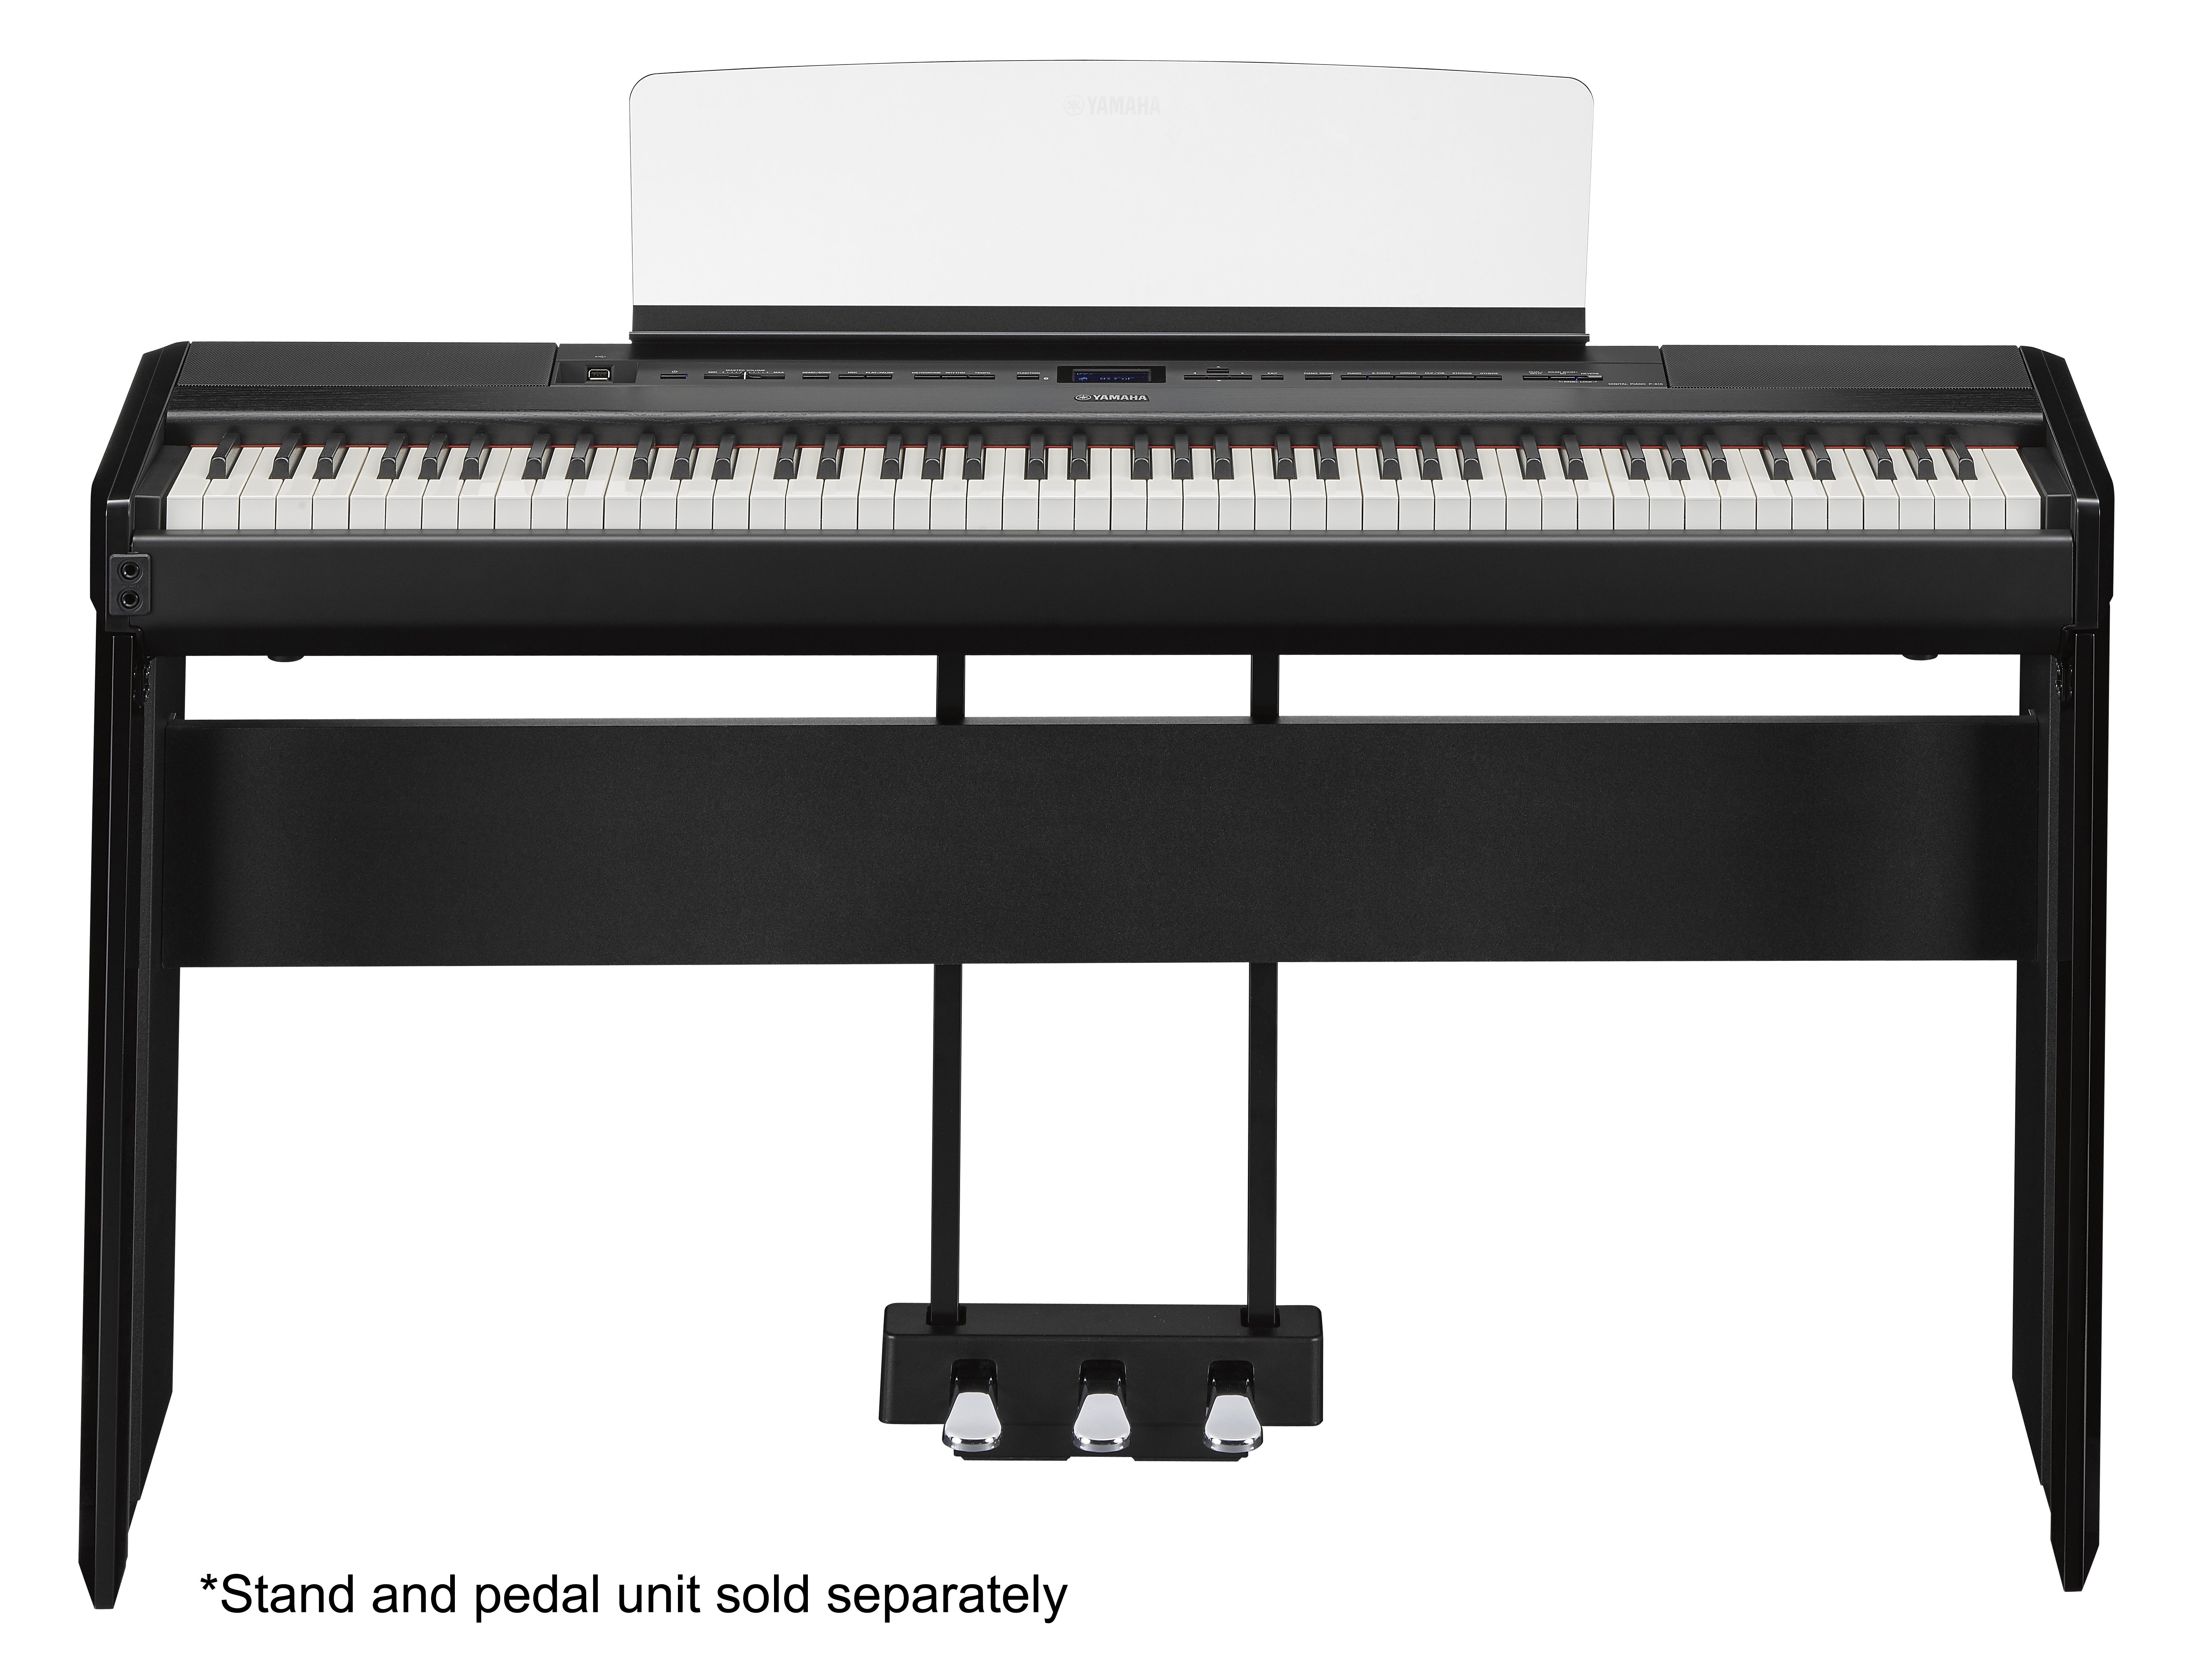 P-515 - Overview - Portables - Pianos - Musical Instruments 